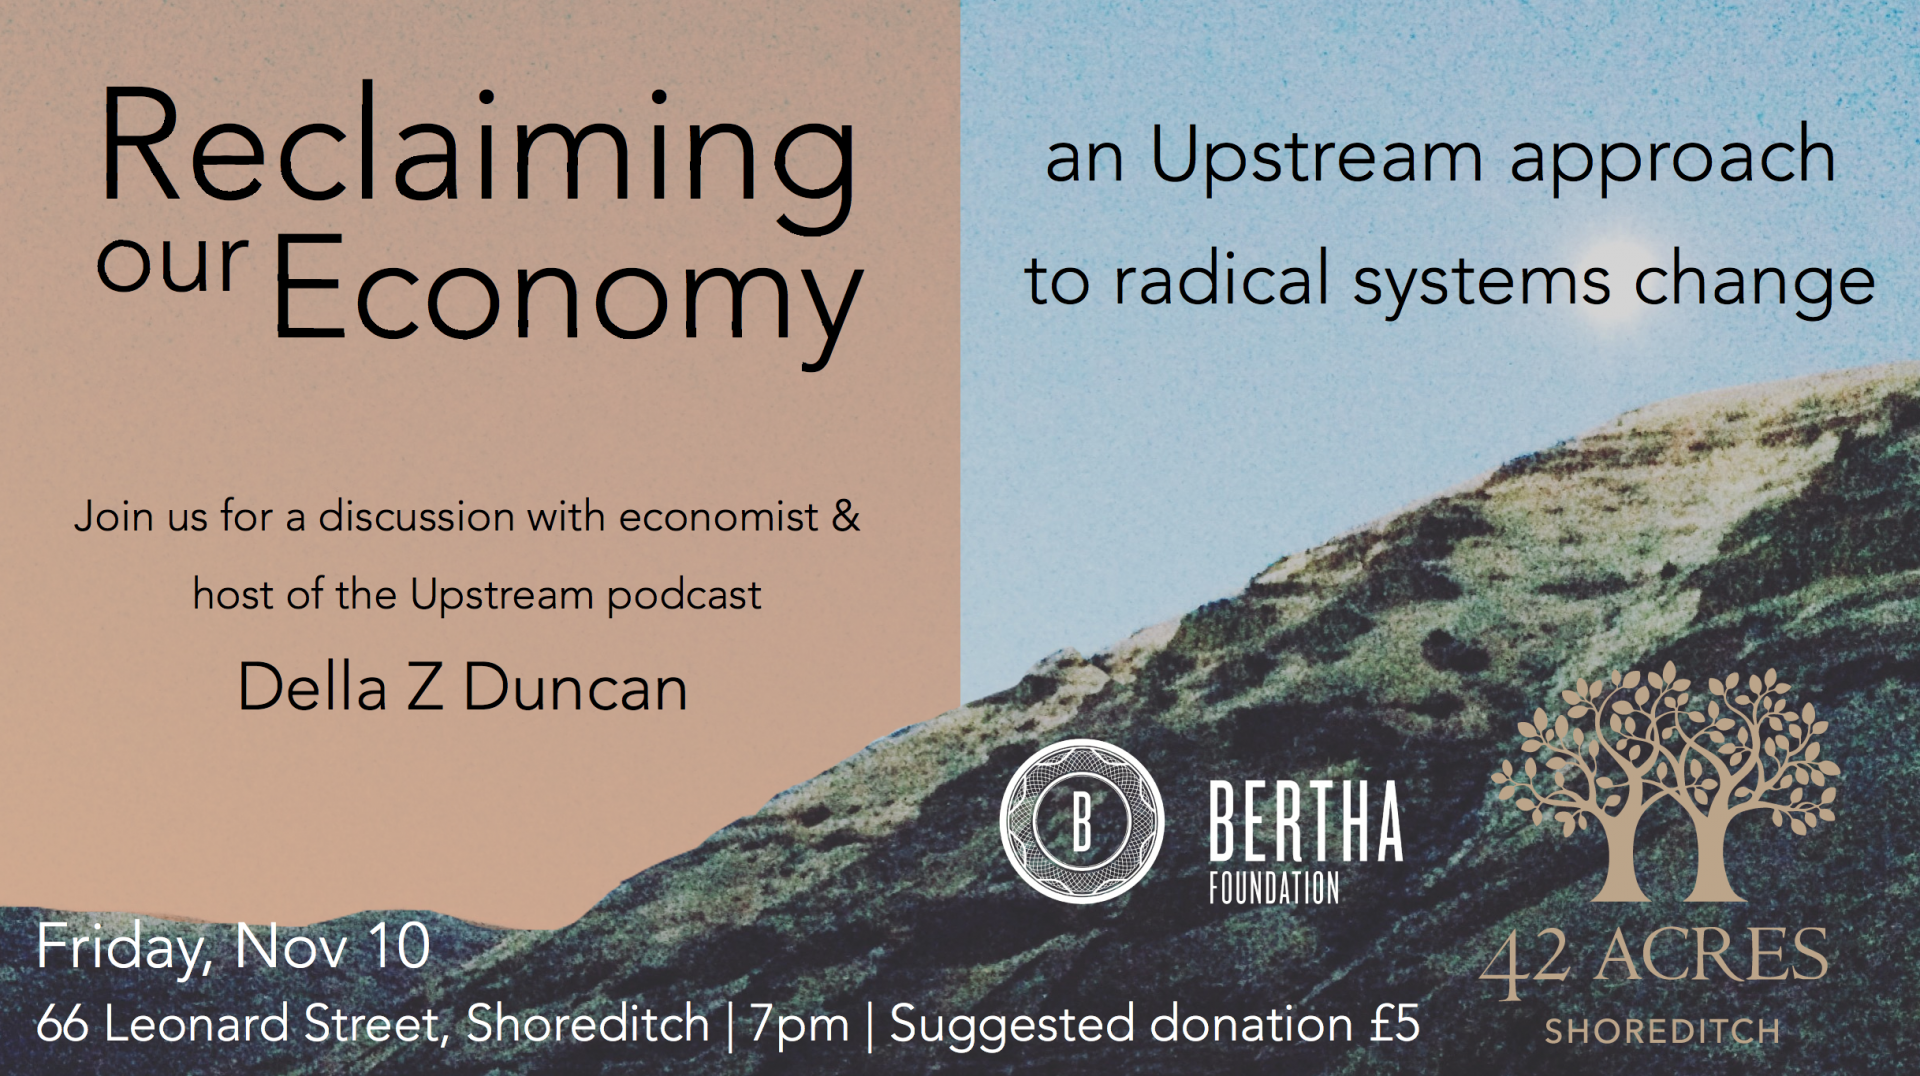 EVENT: Reclaiming our Economy with Della Z Duncan in London, 11/20